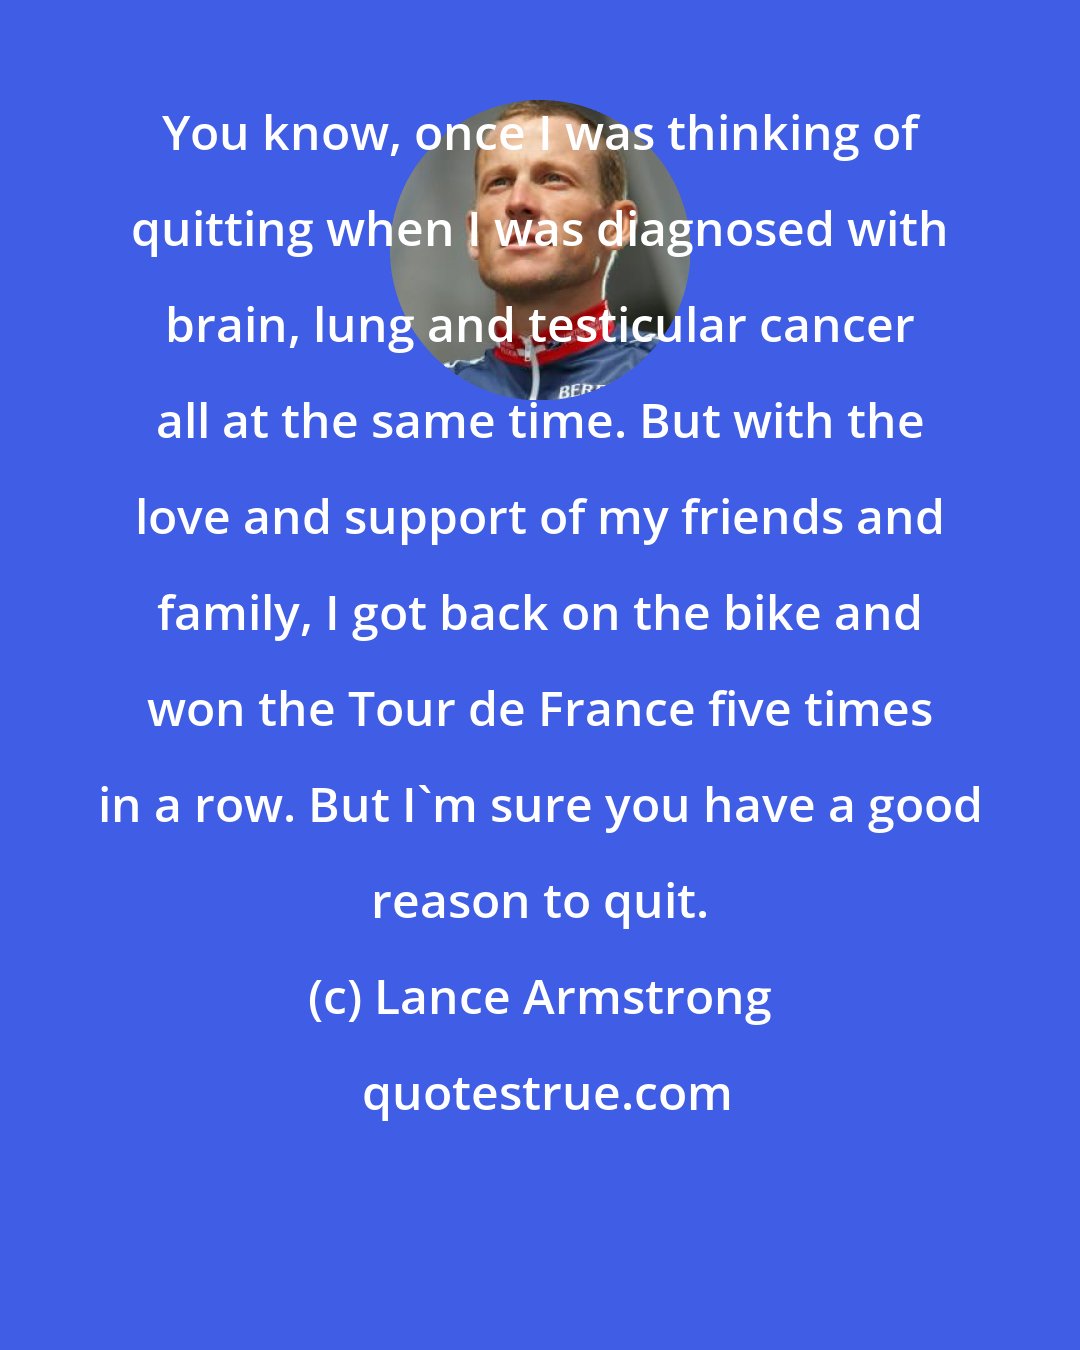 Lance Armstrong: You know, once I was thinking of quitting when I was diagnosed with brain, lung and testicular cancer all at the same time. But with the love and support of my friends and family, I got back on the bike and won the Tour de France five times in a row. But I'm sure you have a good reason to quit.